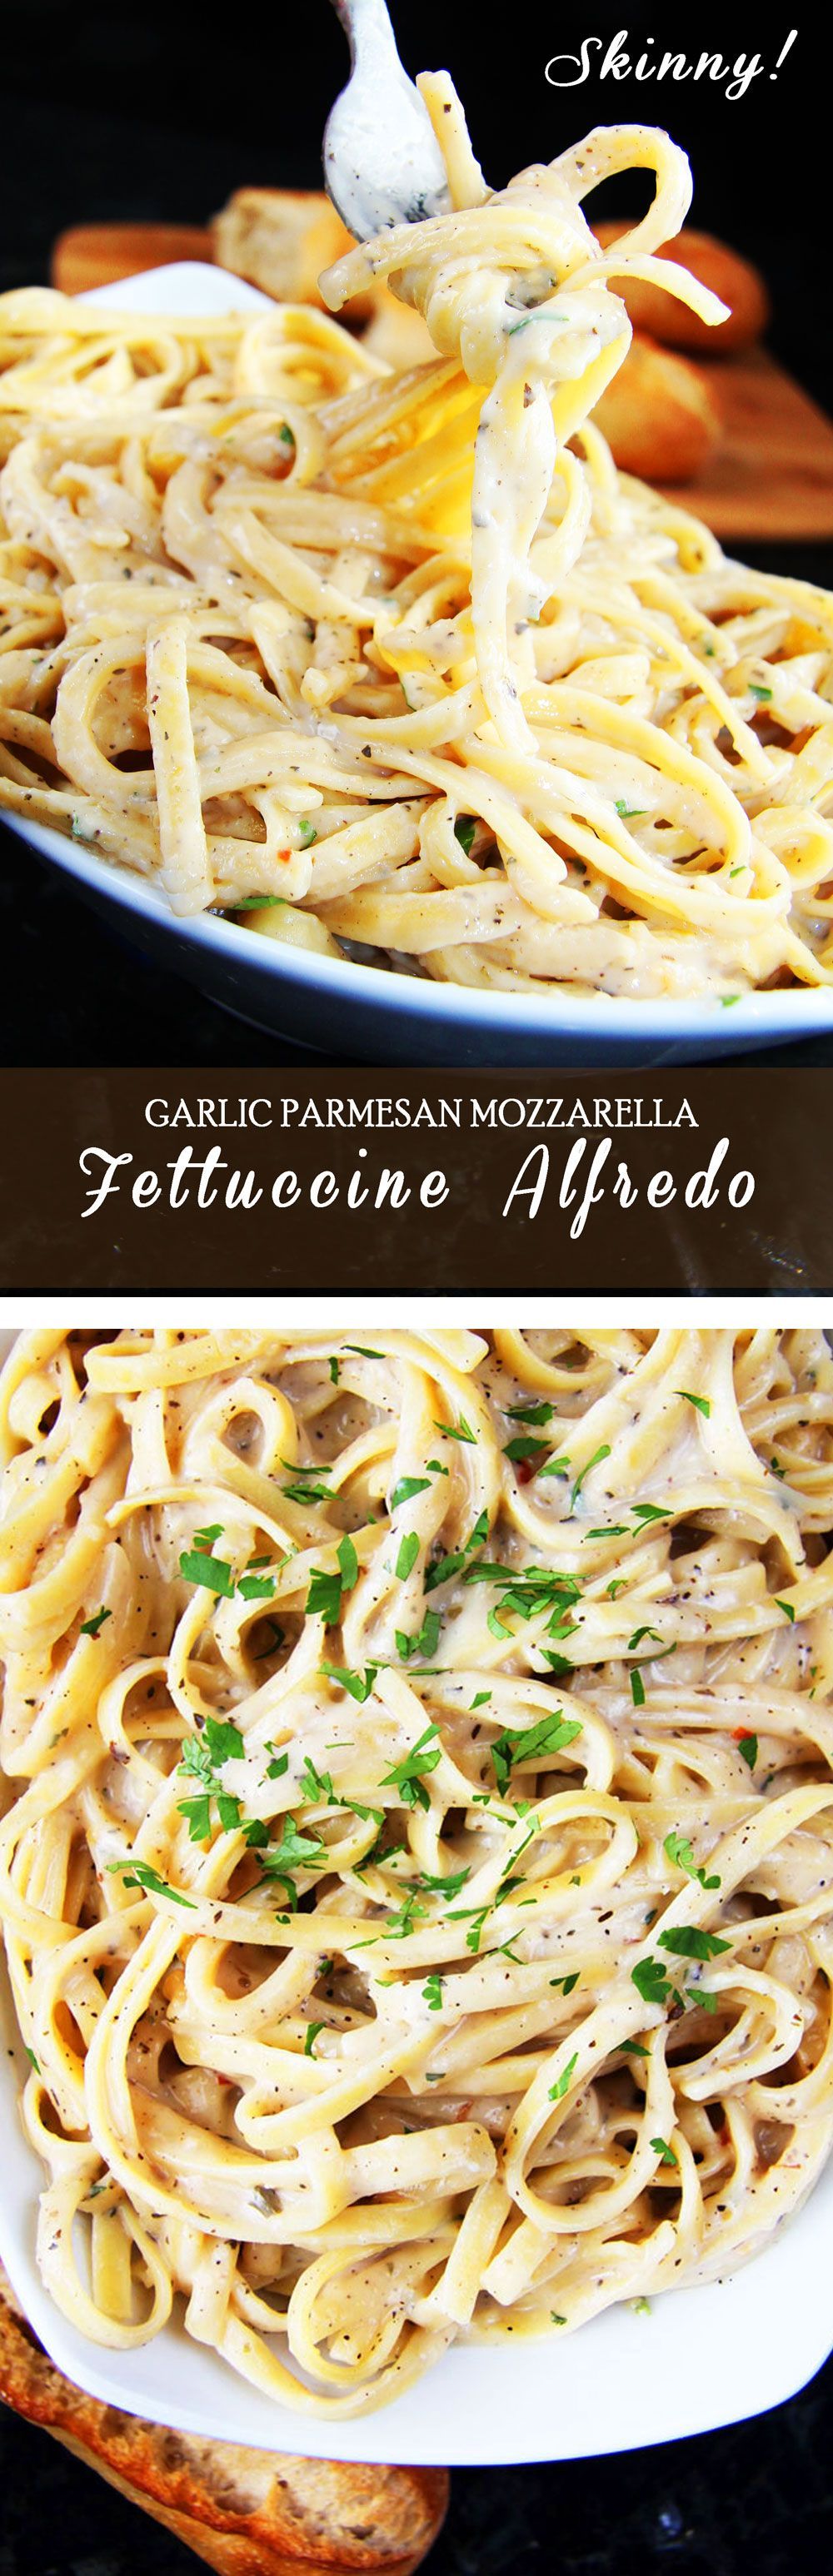 SKINNY Garlic Parmesan Mozzarella Alfredo. Rich and creamy without any butter, heavy cream or cream cheese!!! The pairing of both